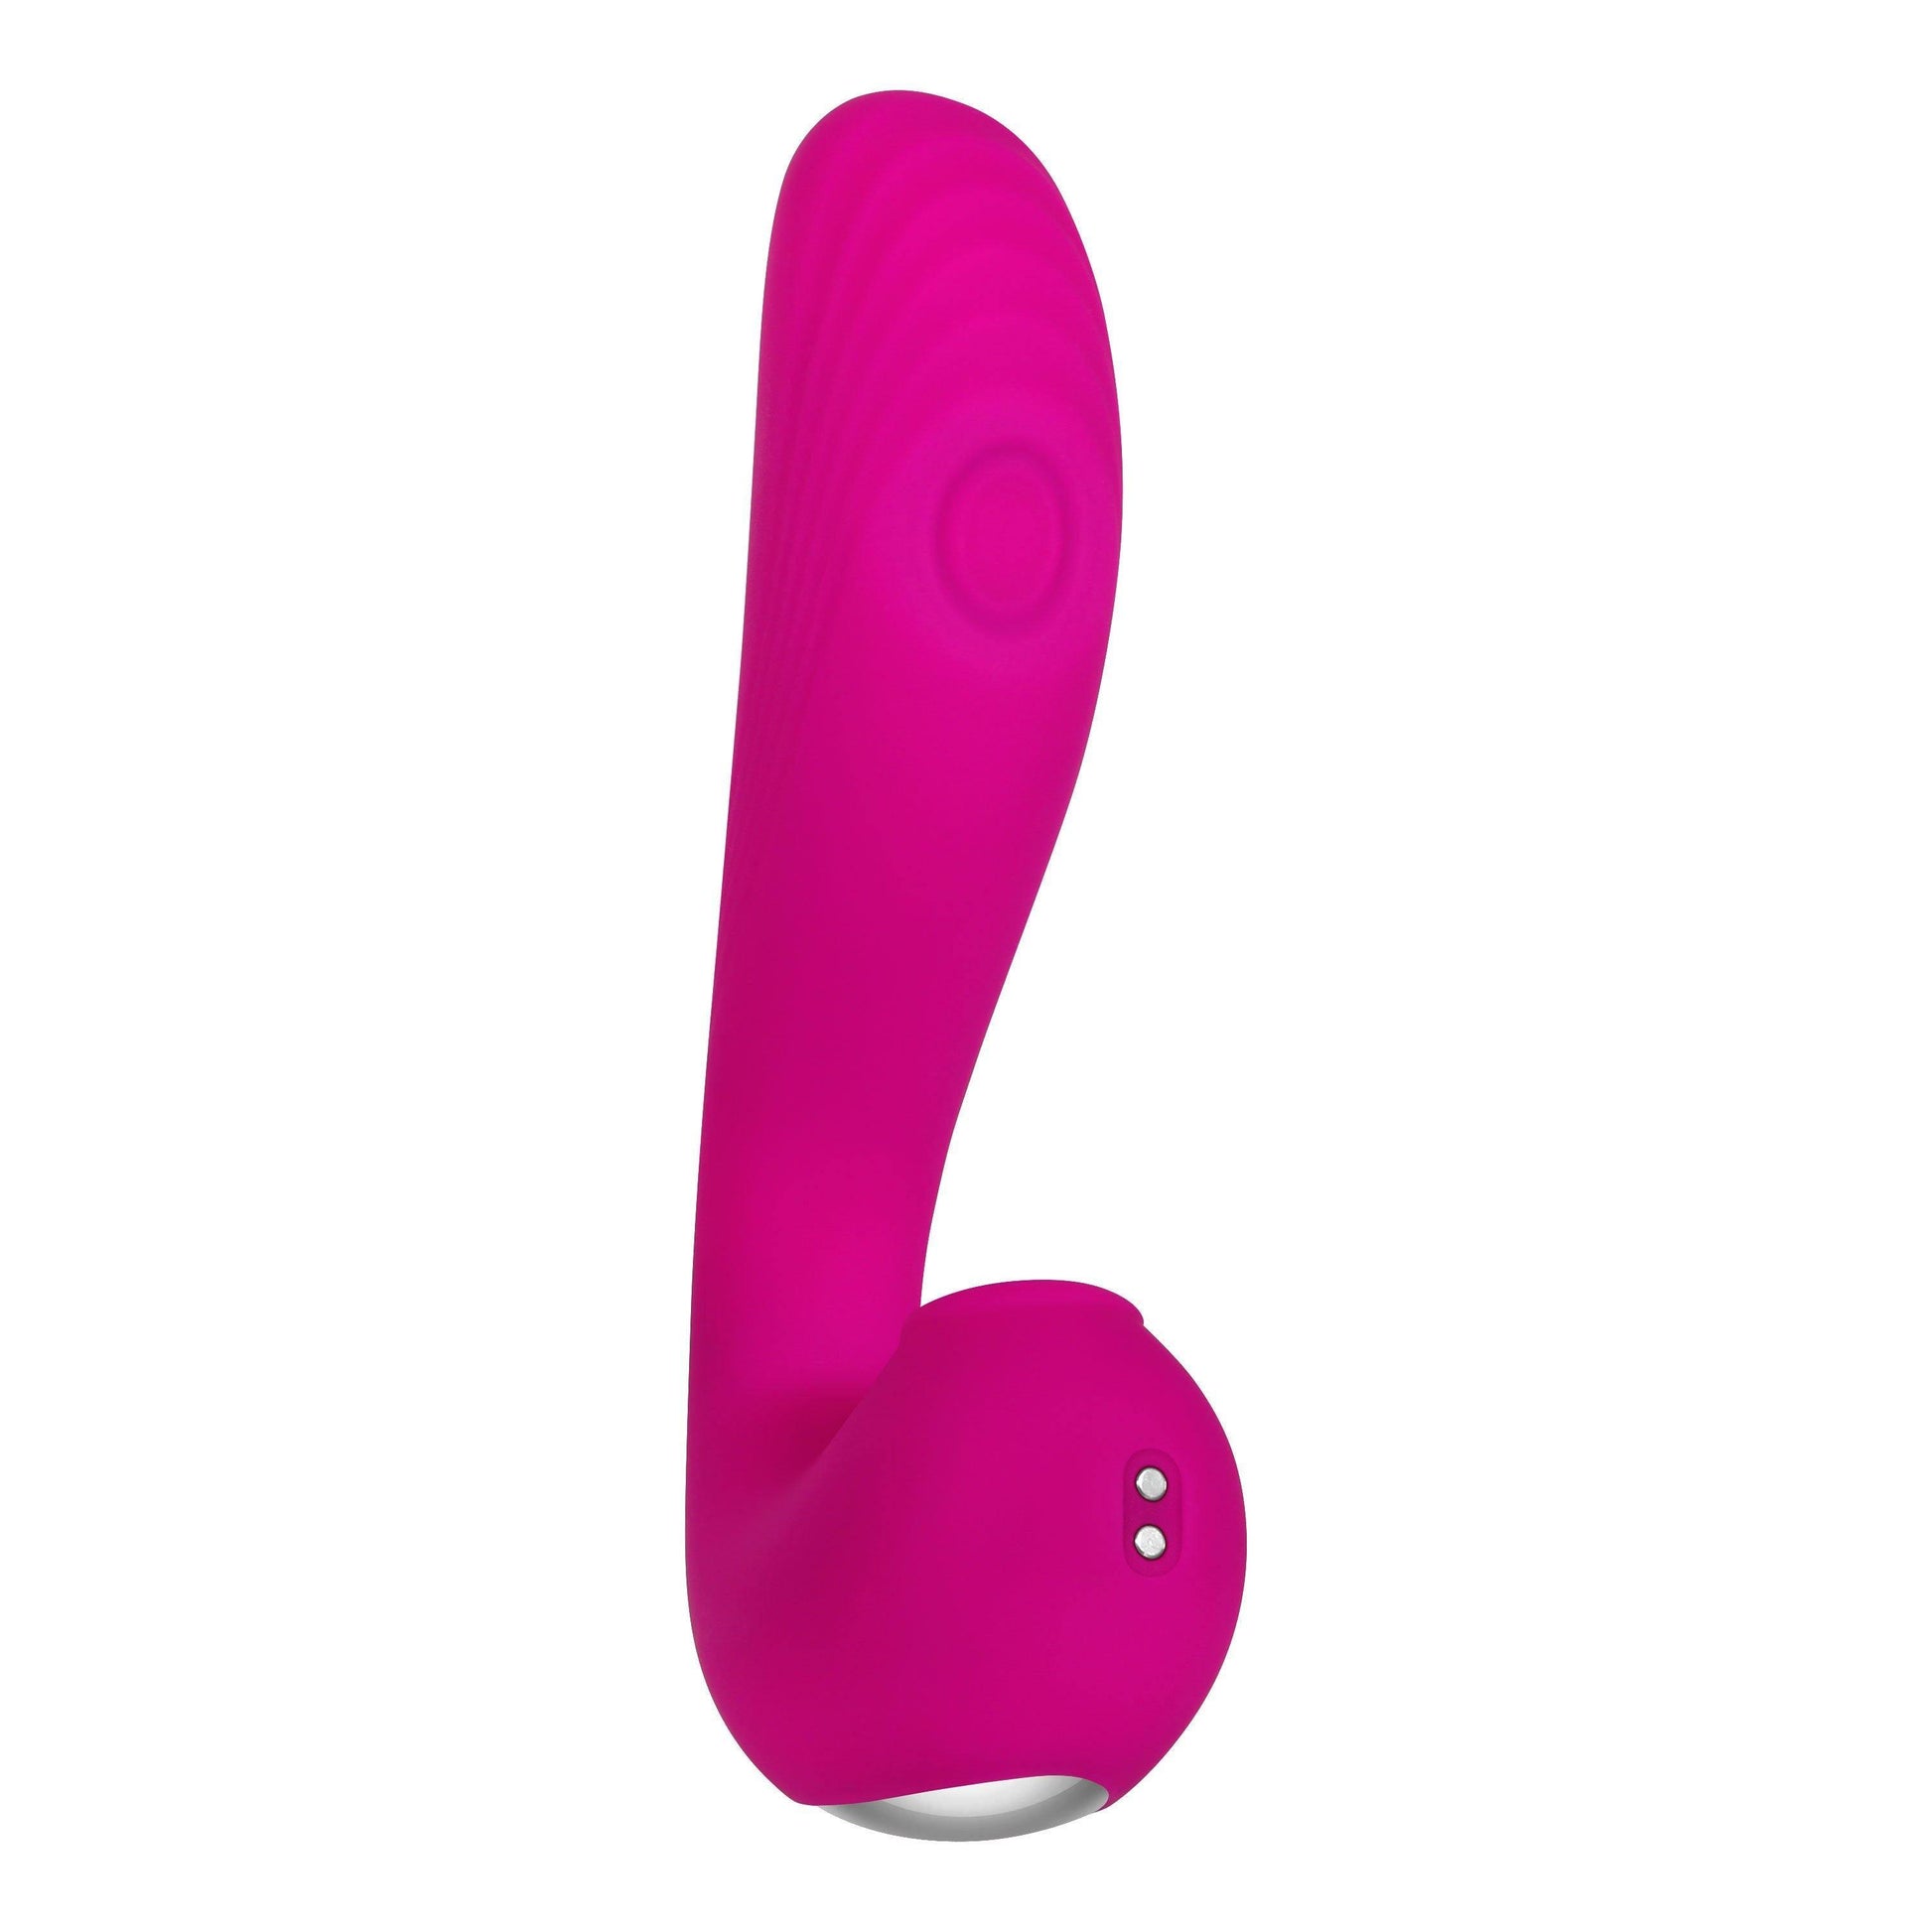 The Note - My Sex Toy Hub